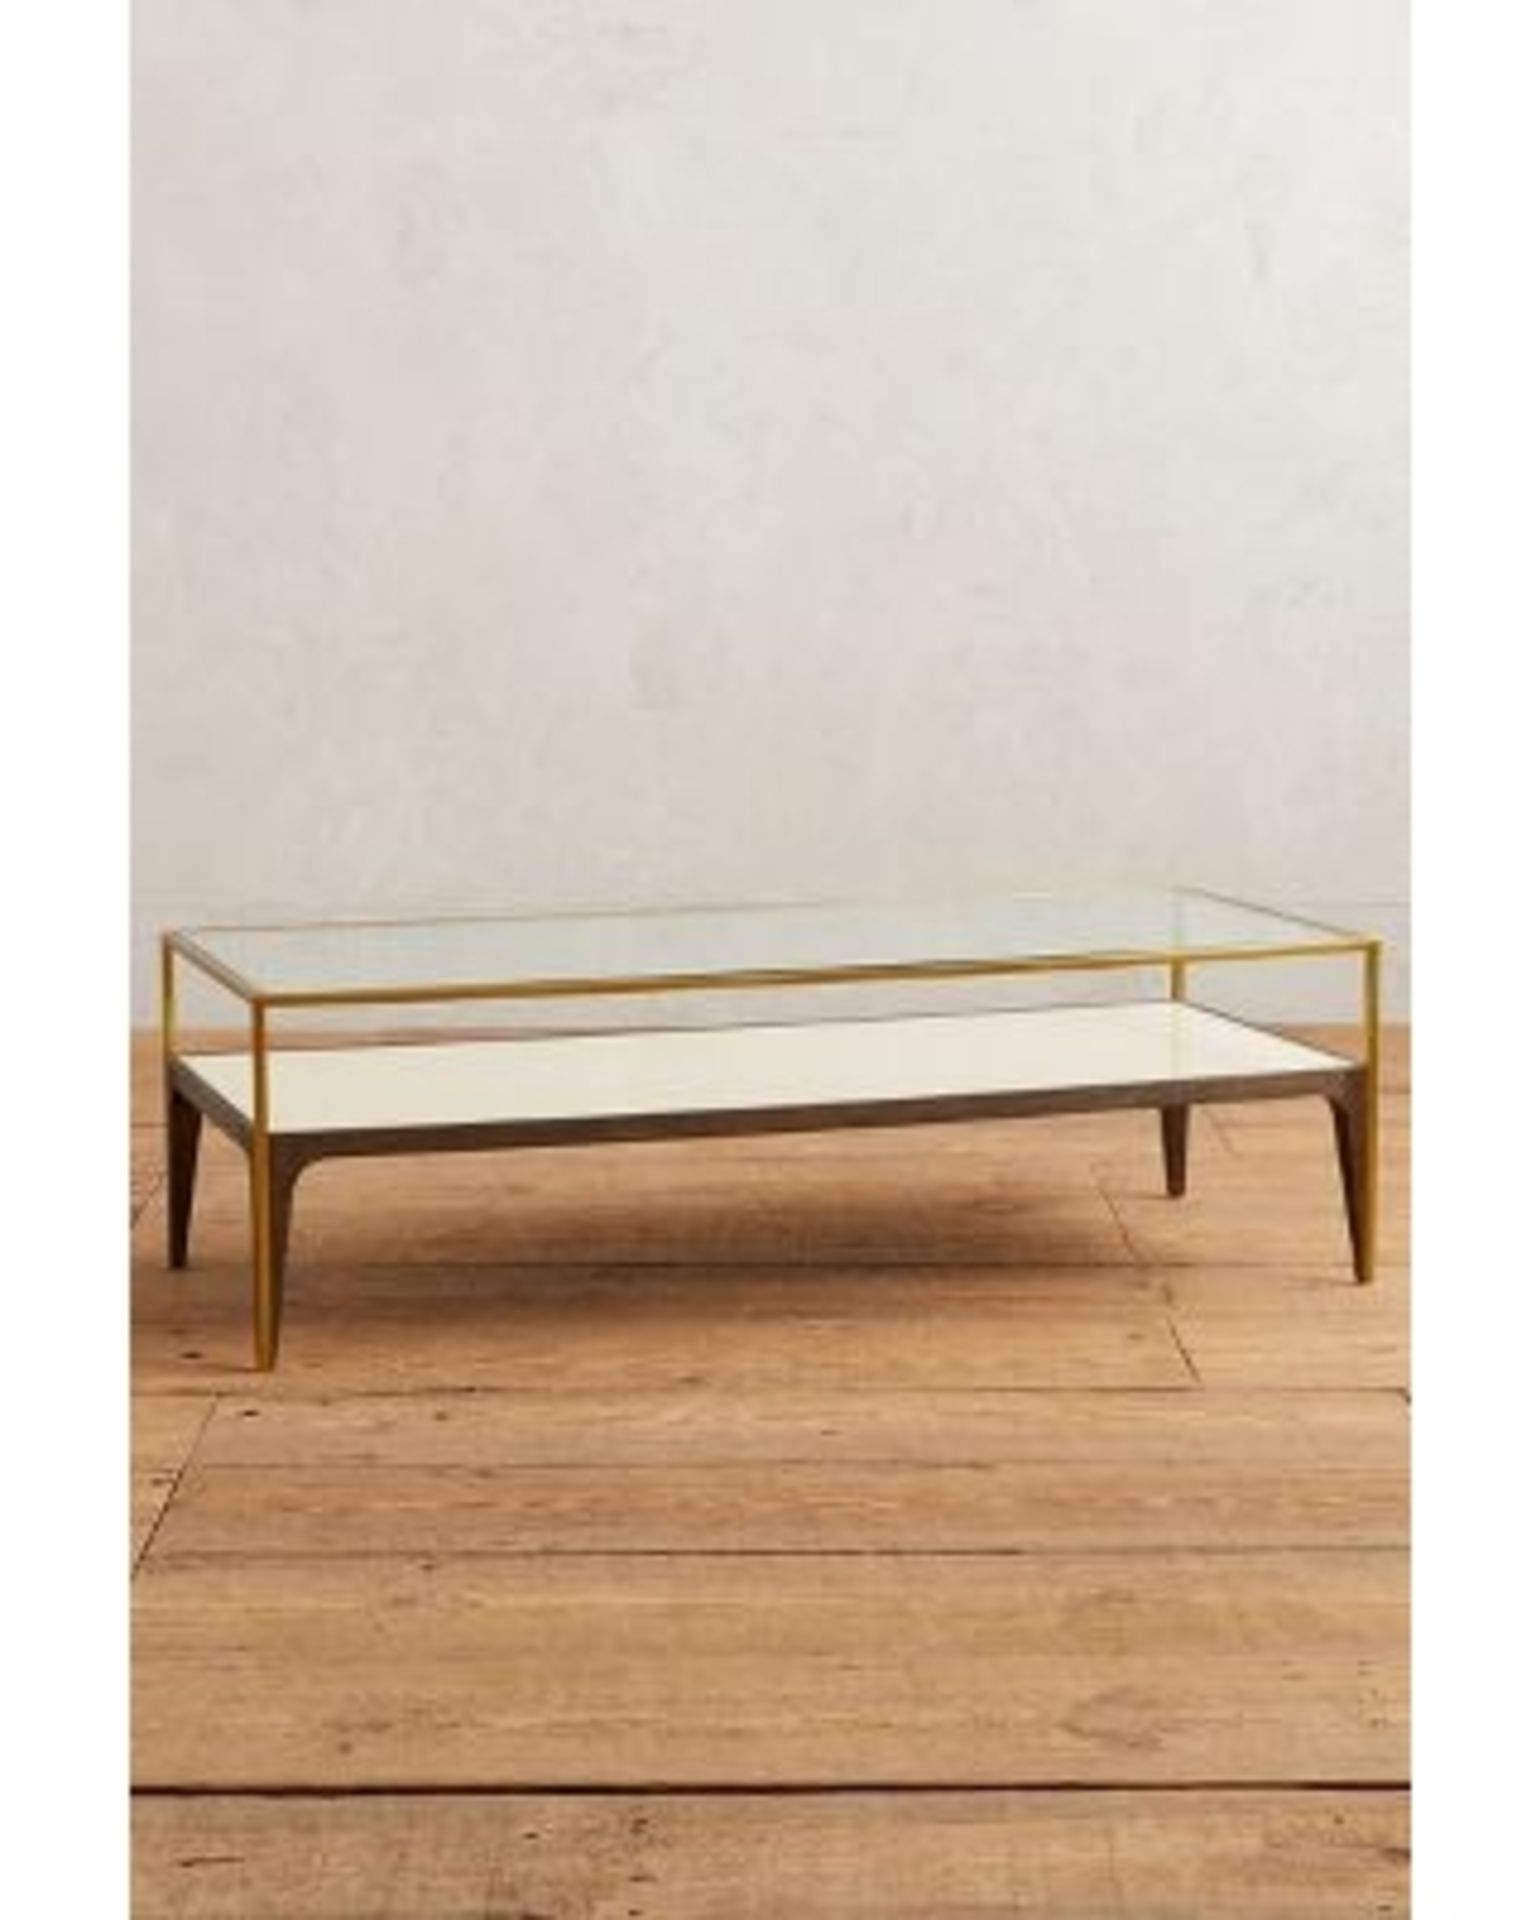 Silhouette Coffee Table - Smoked Glass A Sophisticated Table Crafted From A Solid Beech Wood Frame - Image 2 of 2